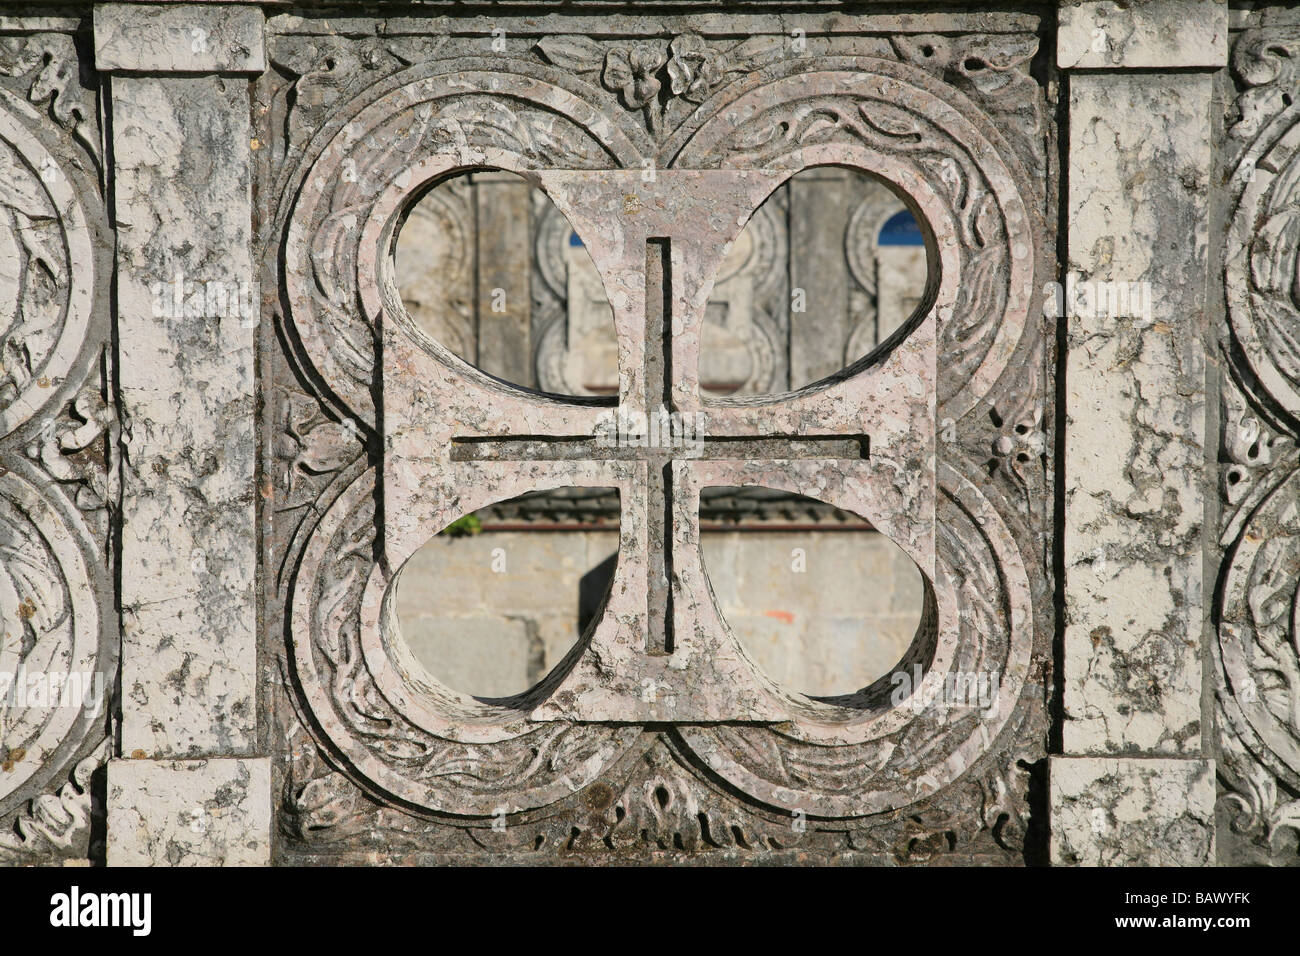 Symbol of the Order of Christ on a balcony of the Belem Tower in Lisbon, Portugal Stock Photo